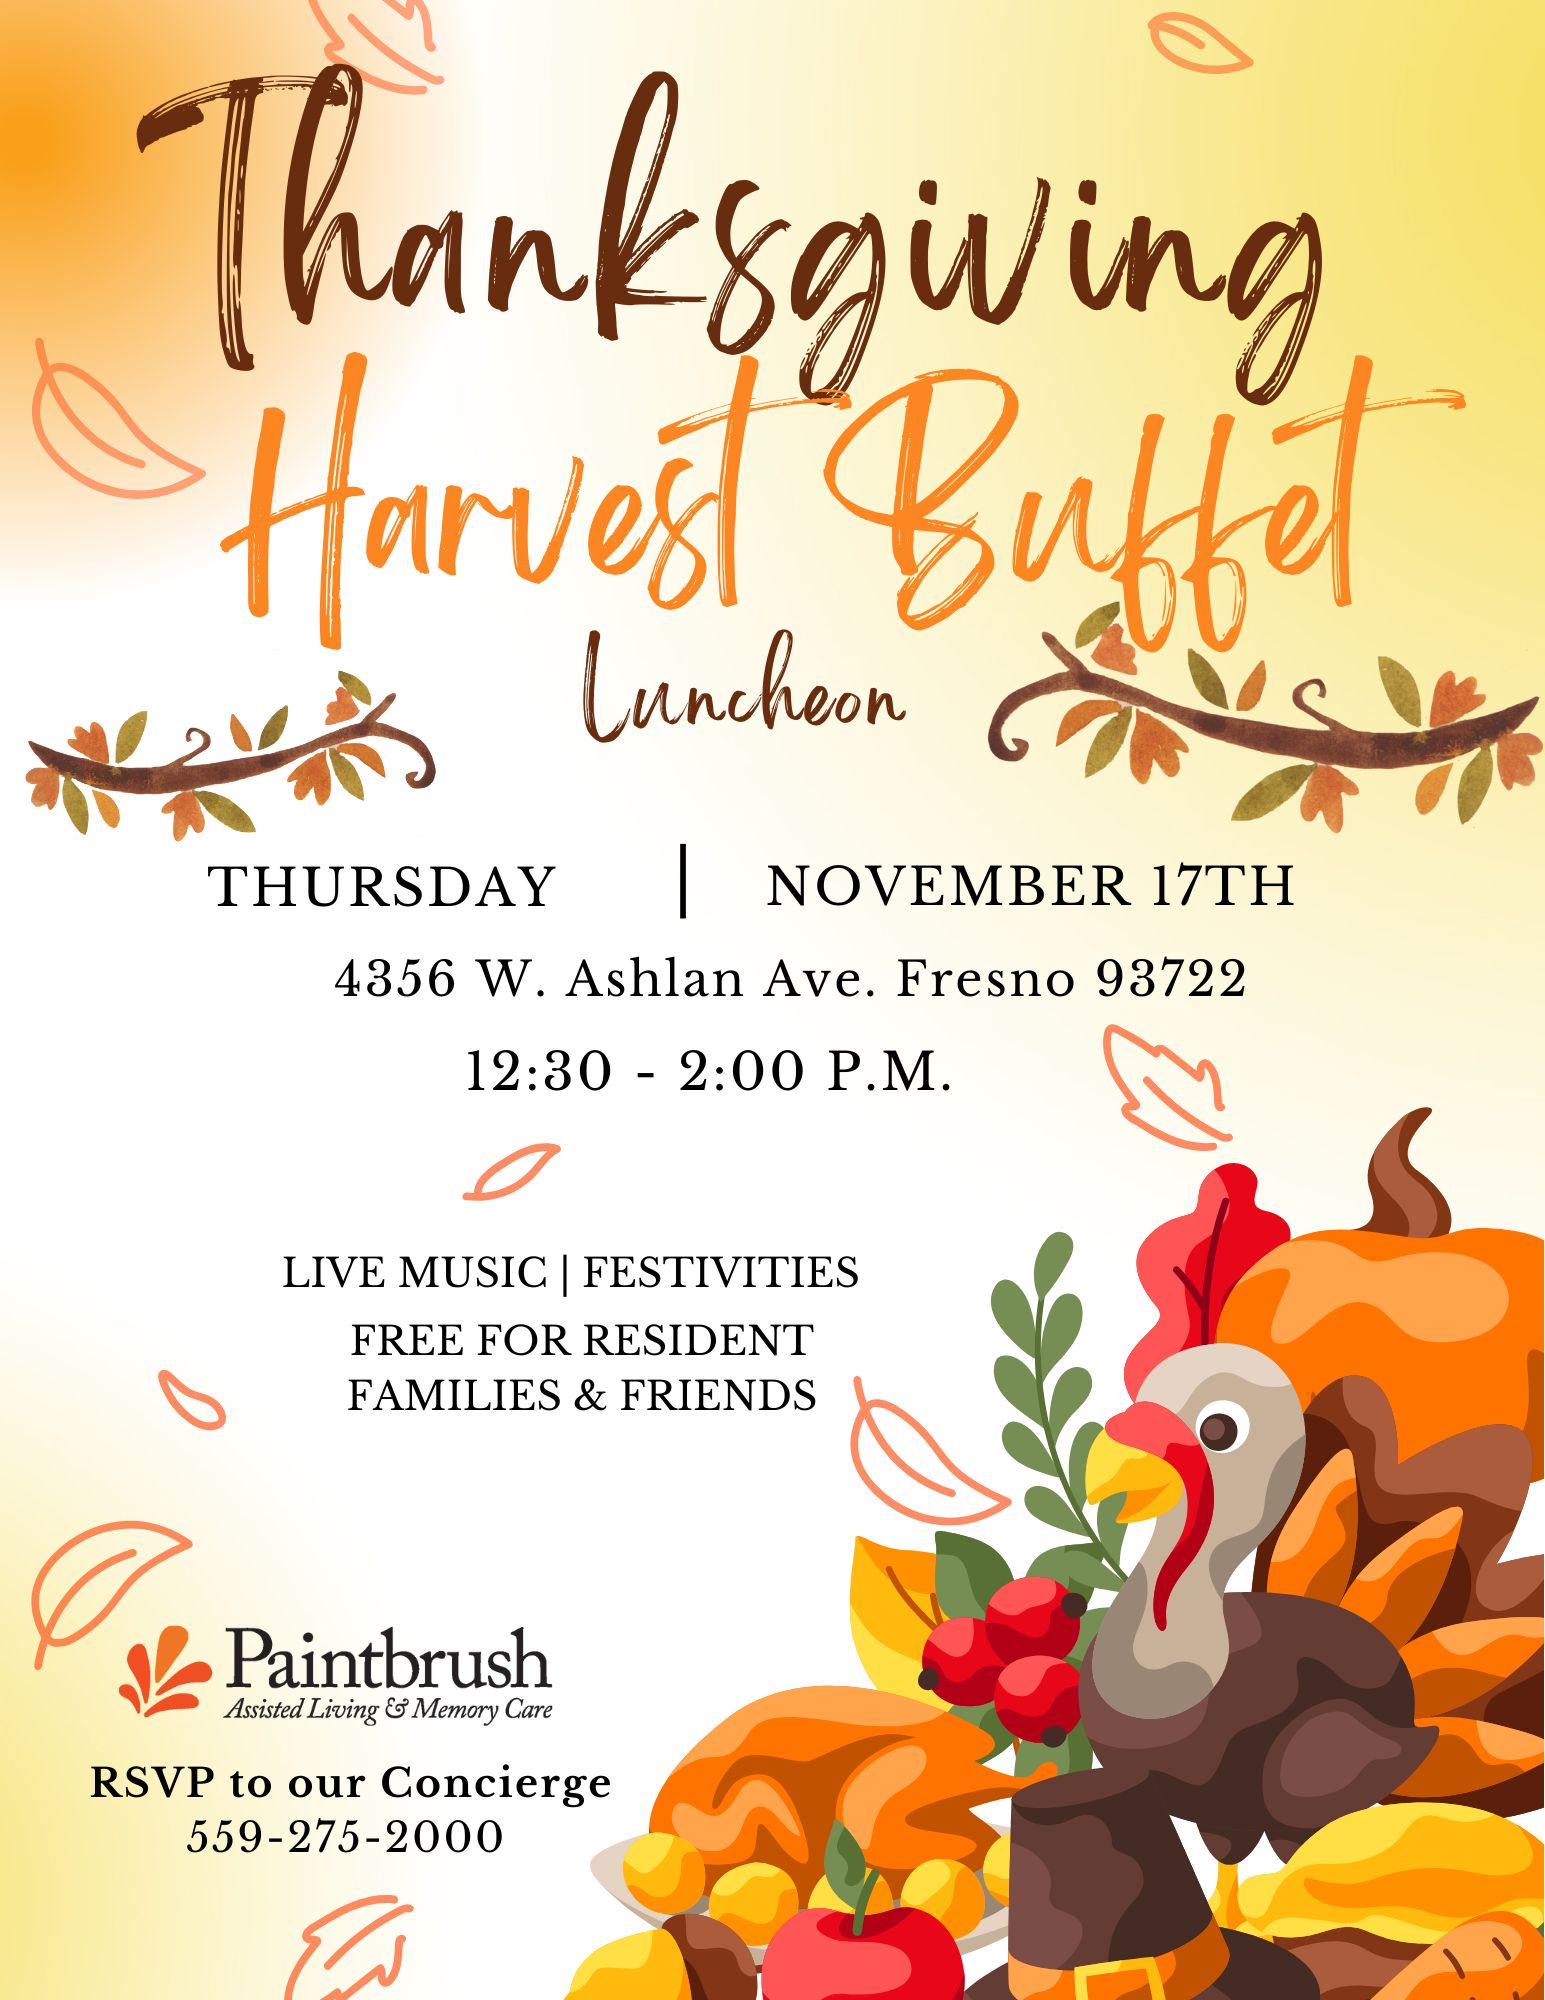 Thanksgiving Harvest Buffet Luncheon - Paintbrush Assisted Living In Fresno